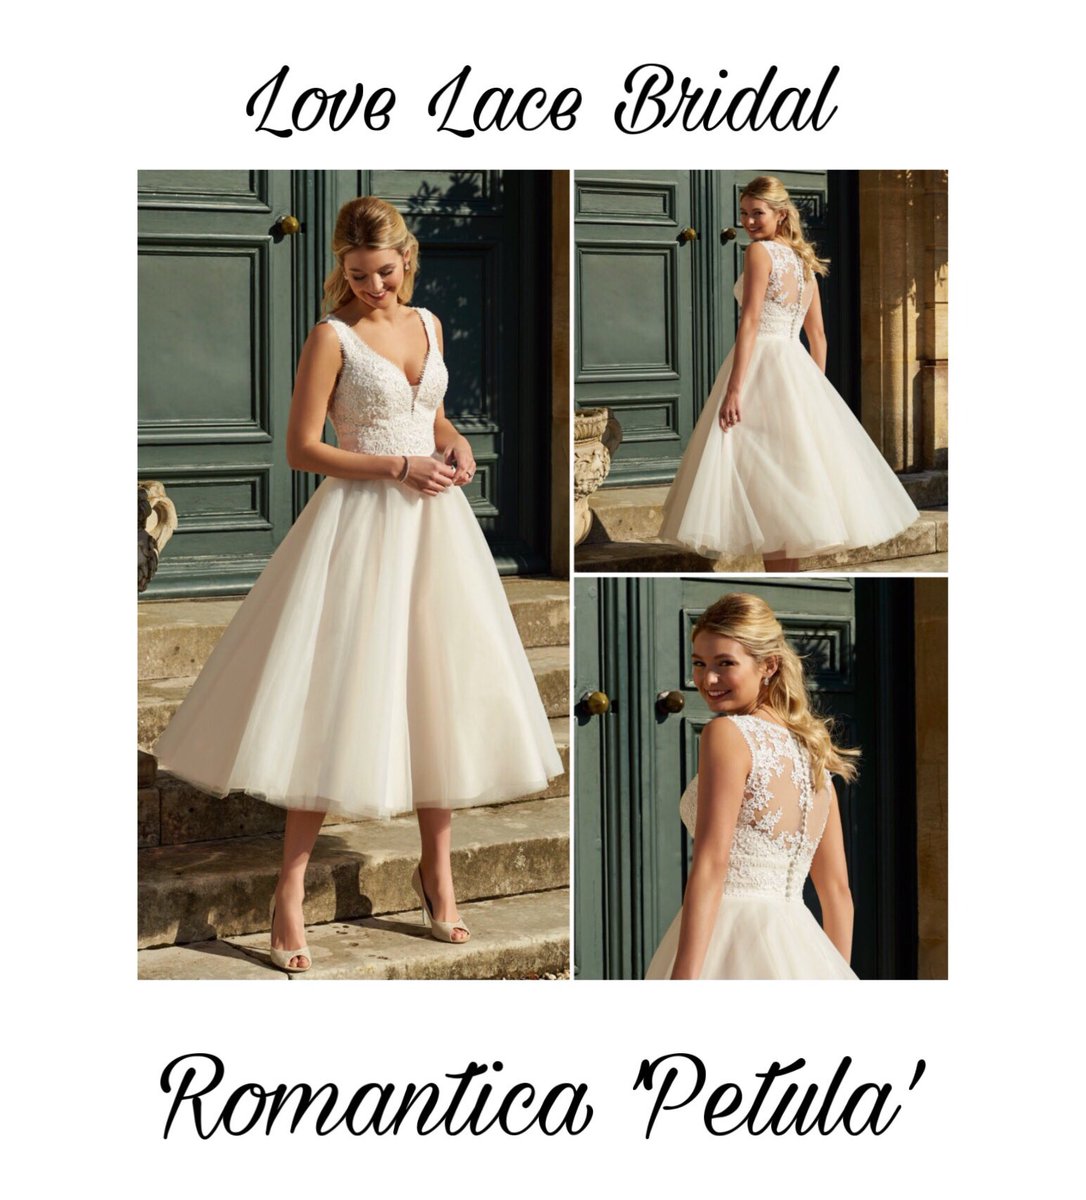 Petula

This is a gorgeous tea length style, with it’s layers and layers of dreamy tulle and flattering lace bodice. Style with tousled waves, sparkling jewellery and statement heels for an unforgettable bridal look.
Romantica Collections 
#tealength #weddingdress #wedding